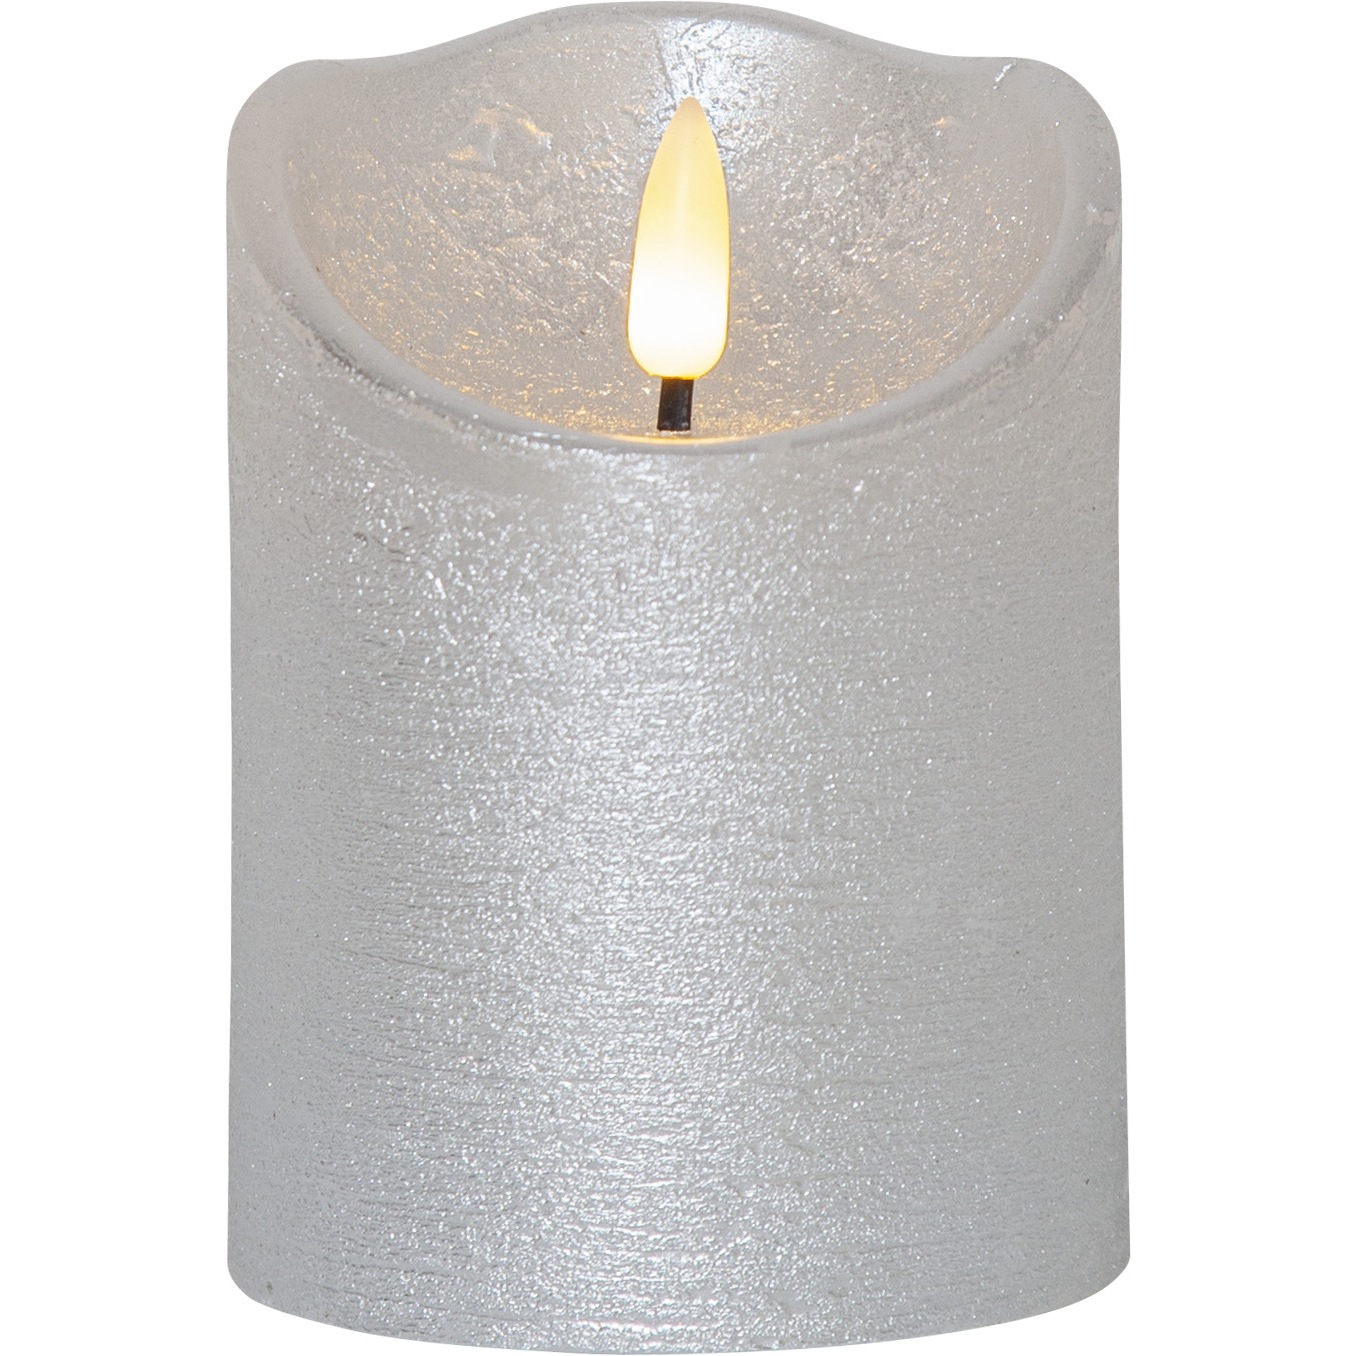 Flamme Rustic LED Pillar Candle Silver, 10 cm